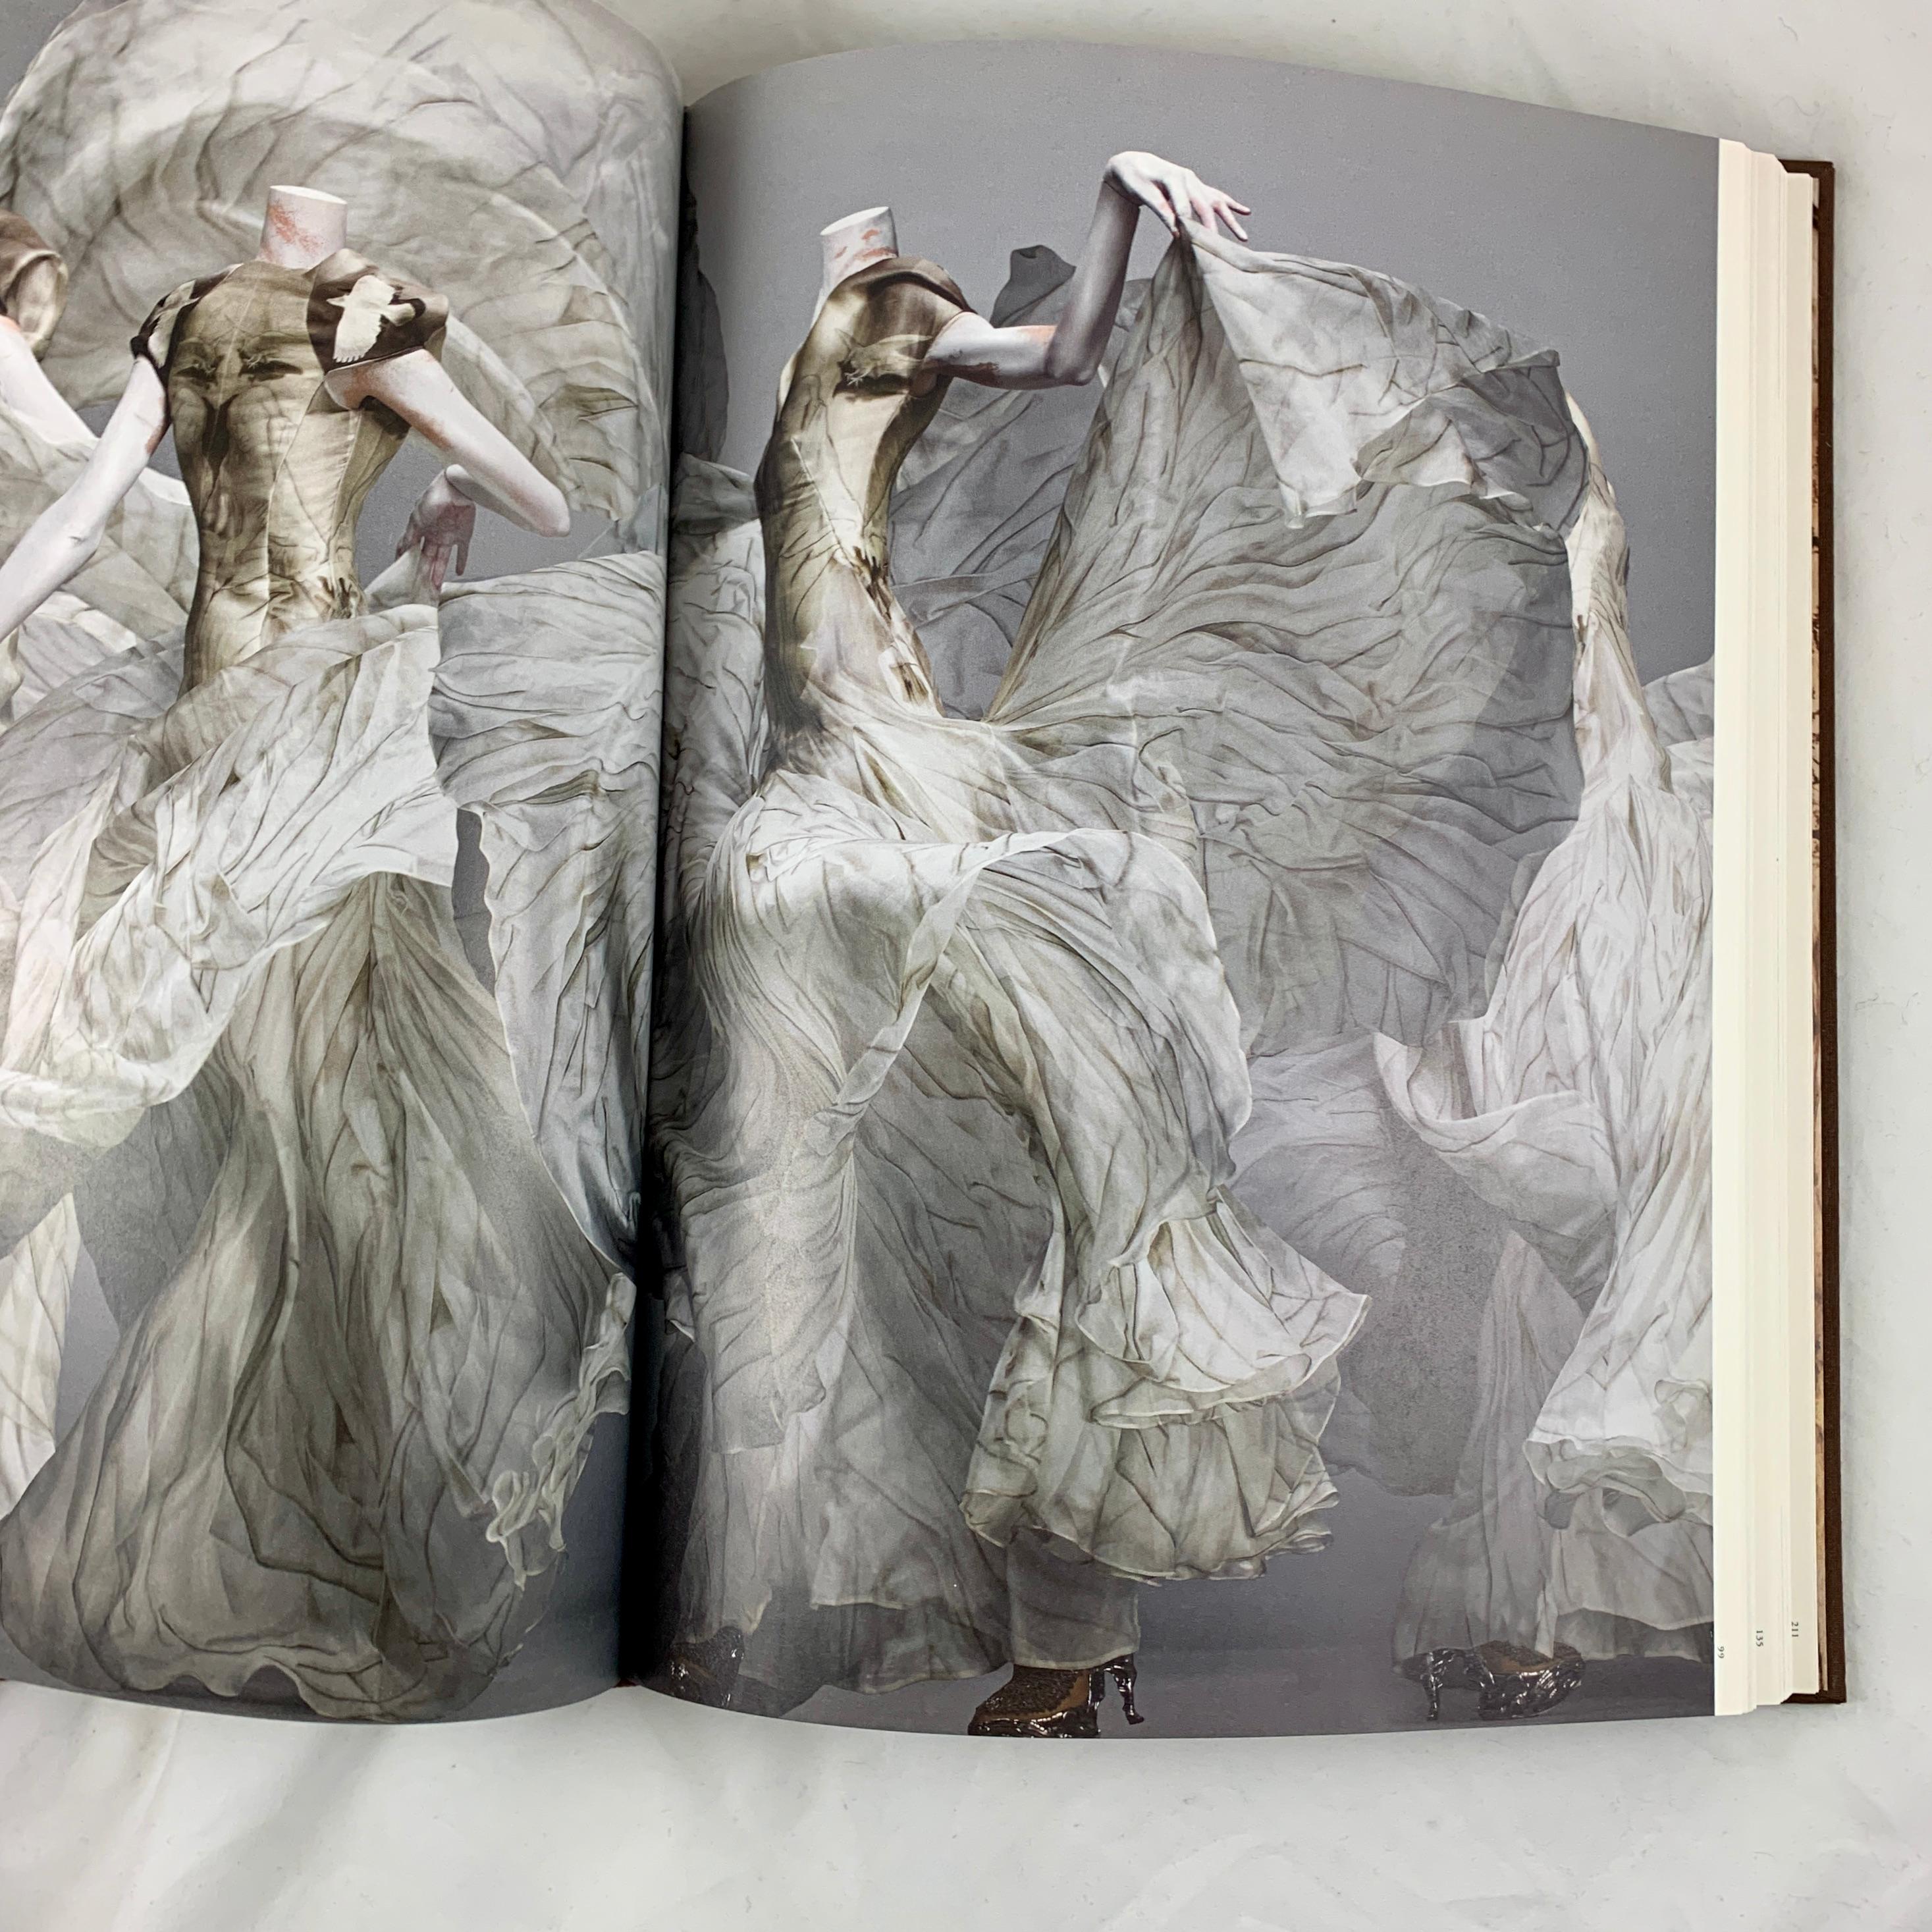 Alexander McQueen: Savage Beauty, Andrew Bolton MOMA Illustrated Hardcover Book 5